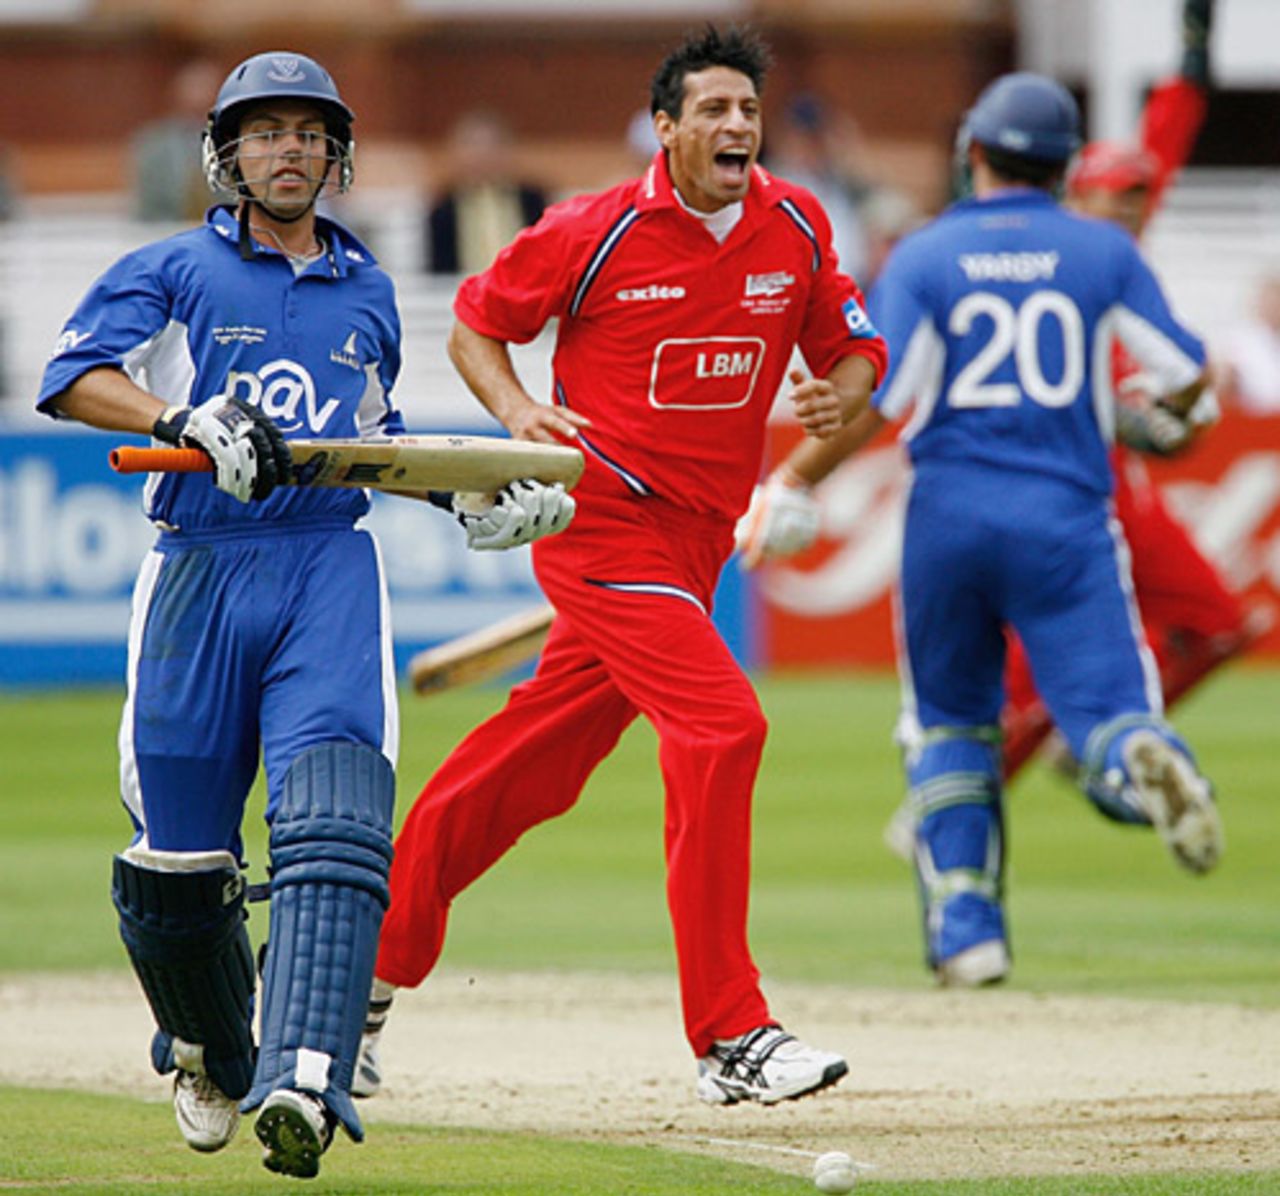 Sajid Mahmood celebrates as Carl Hopkinson is run out, Lancashire v Sussex, C&G Trophy Final, Lord's, August 26, 2006